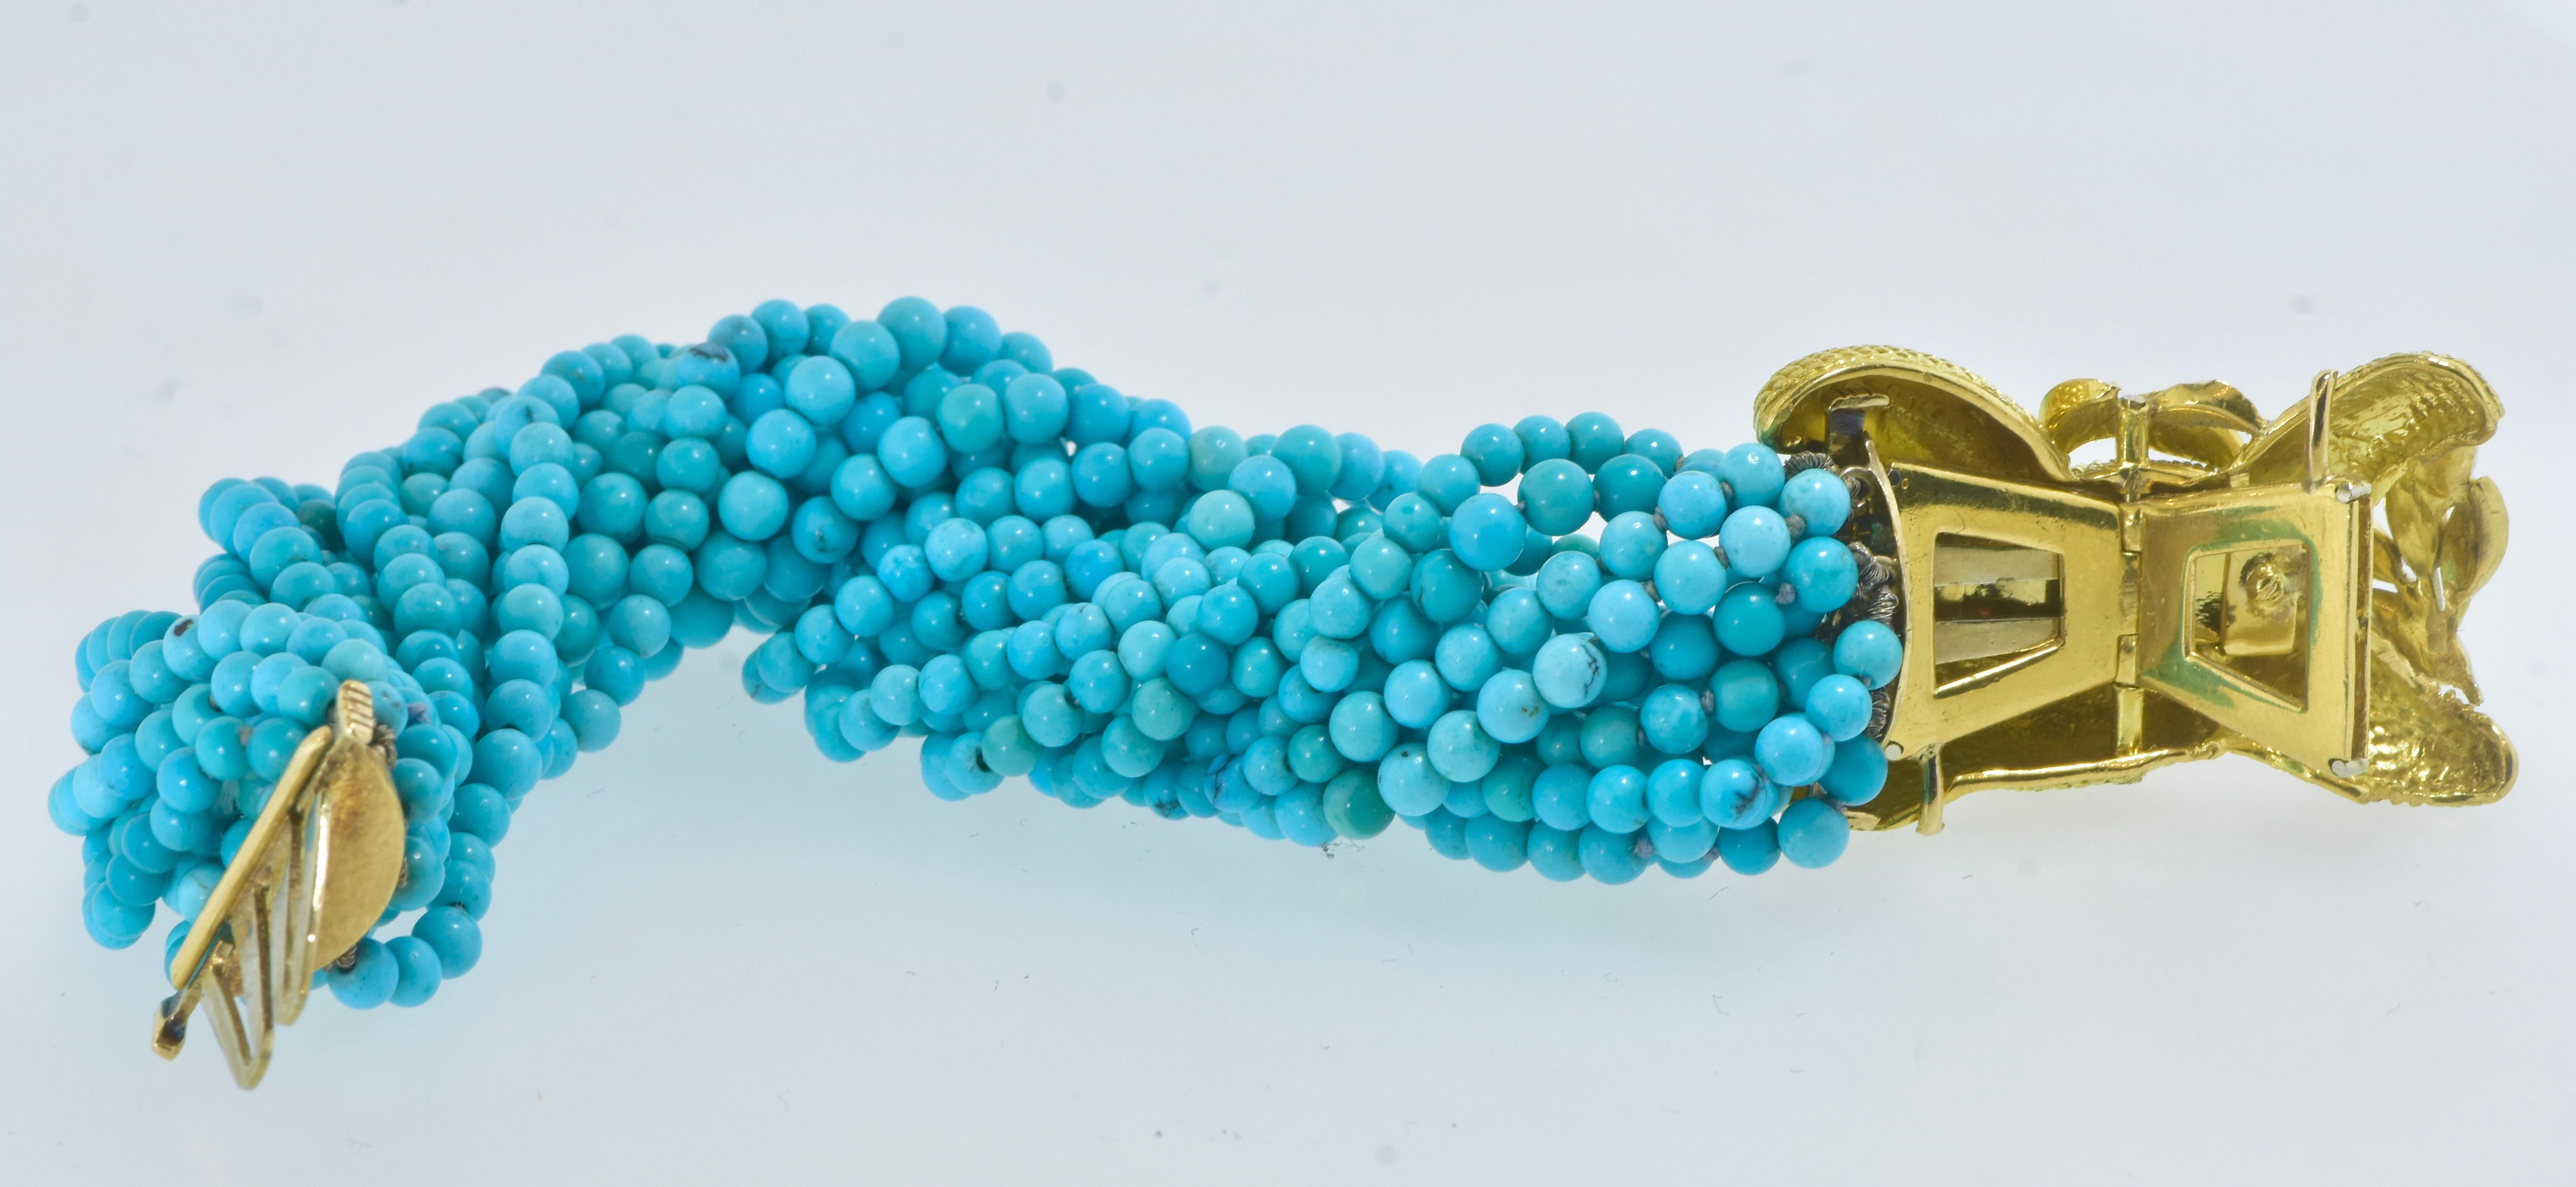 Fine Turquoise Bead Torsade Bracelet Centering an 18K High Relief Clasp, c. 1965 For Sale 11